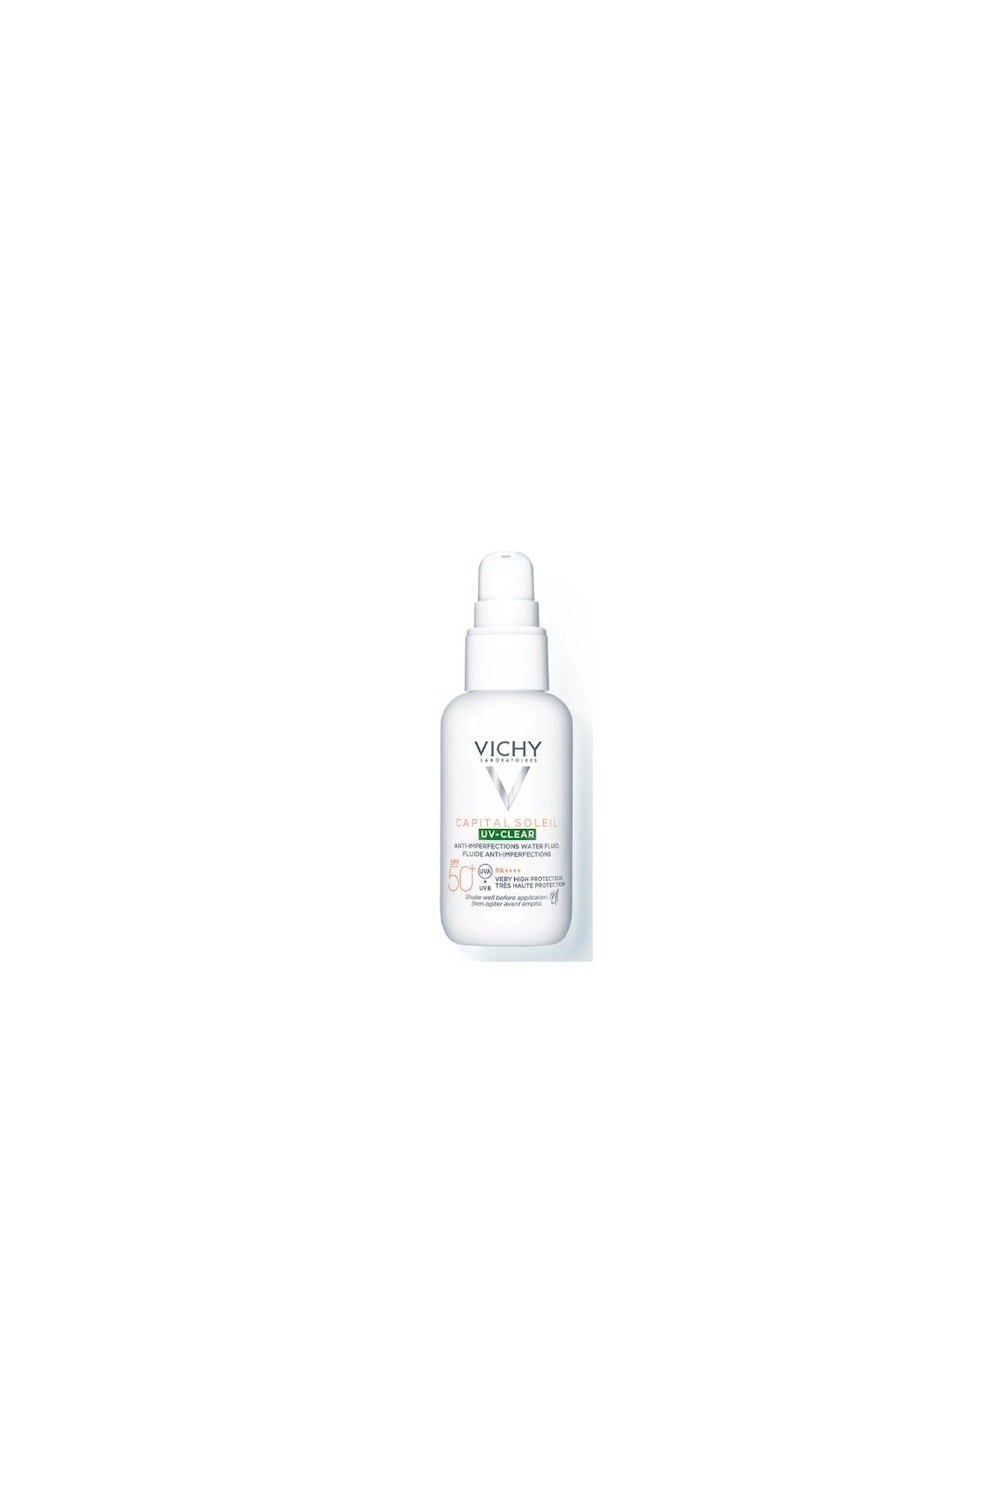 VICHY - Capital Soleil Uv Clear Fluide Anti Imperfections Spf50+ 40 ml